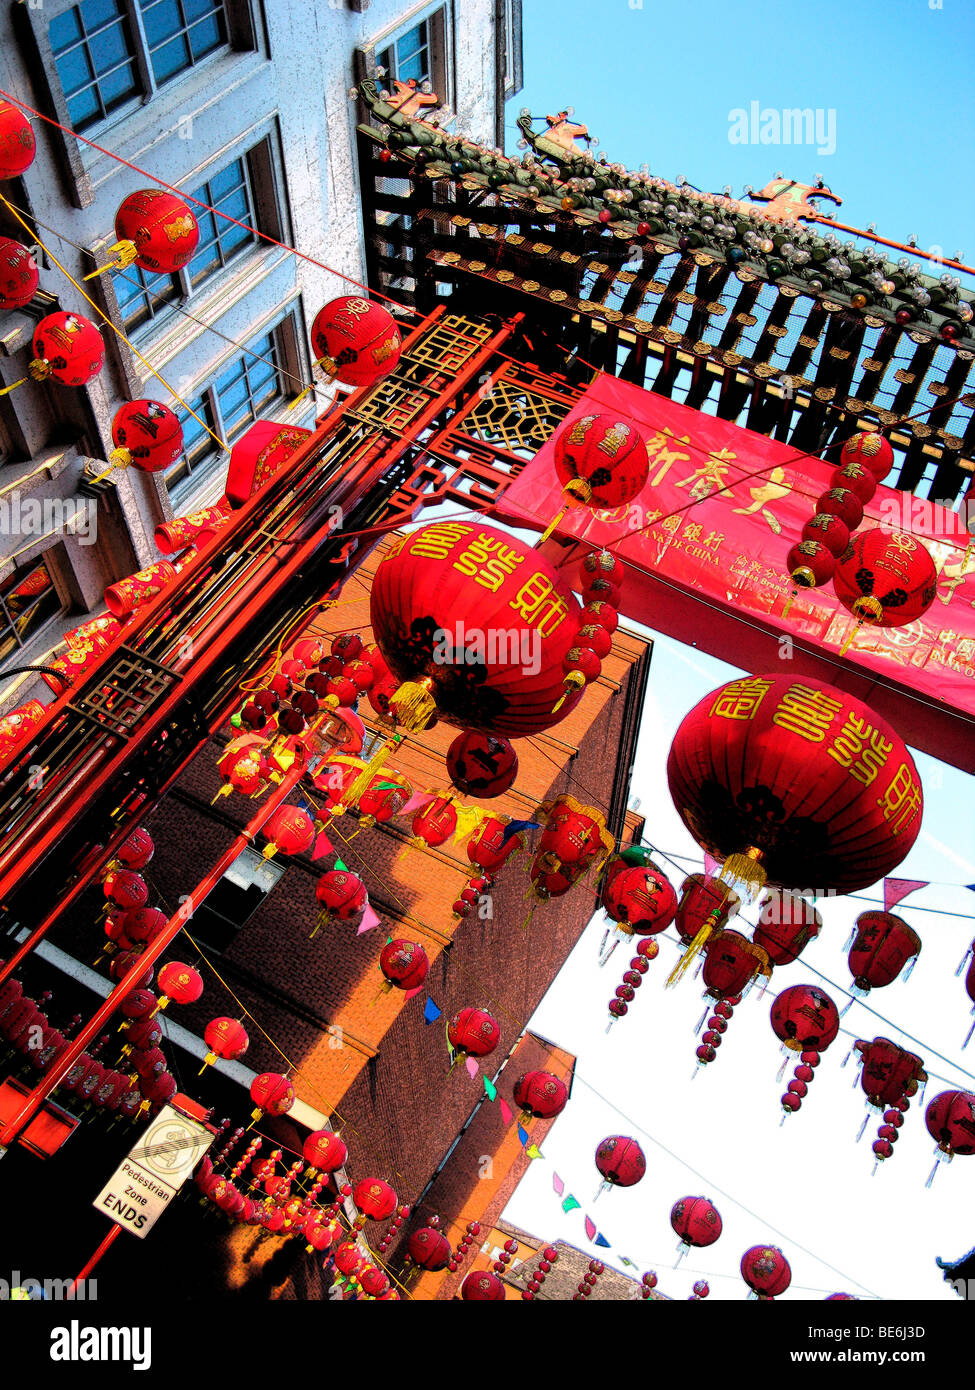 Chinese new year,soho london sea of red,annual celebration festivities cultural.lanterns.uk Stock Photo